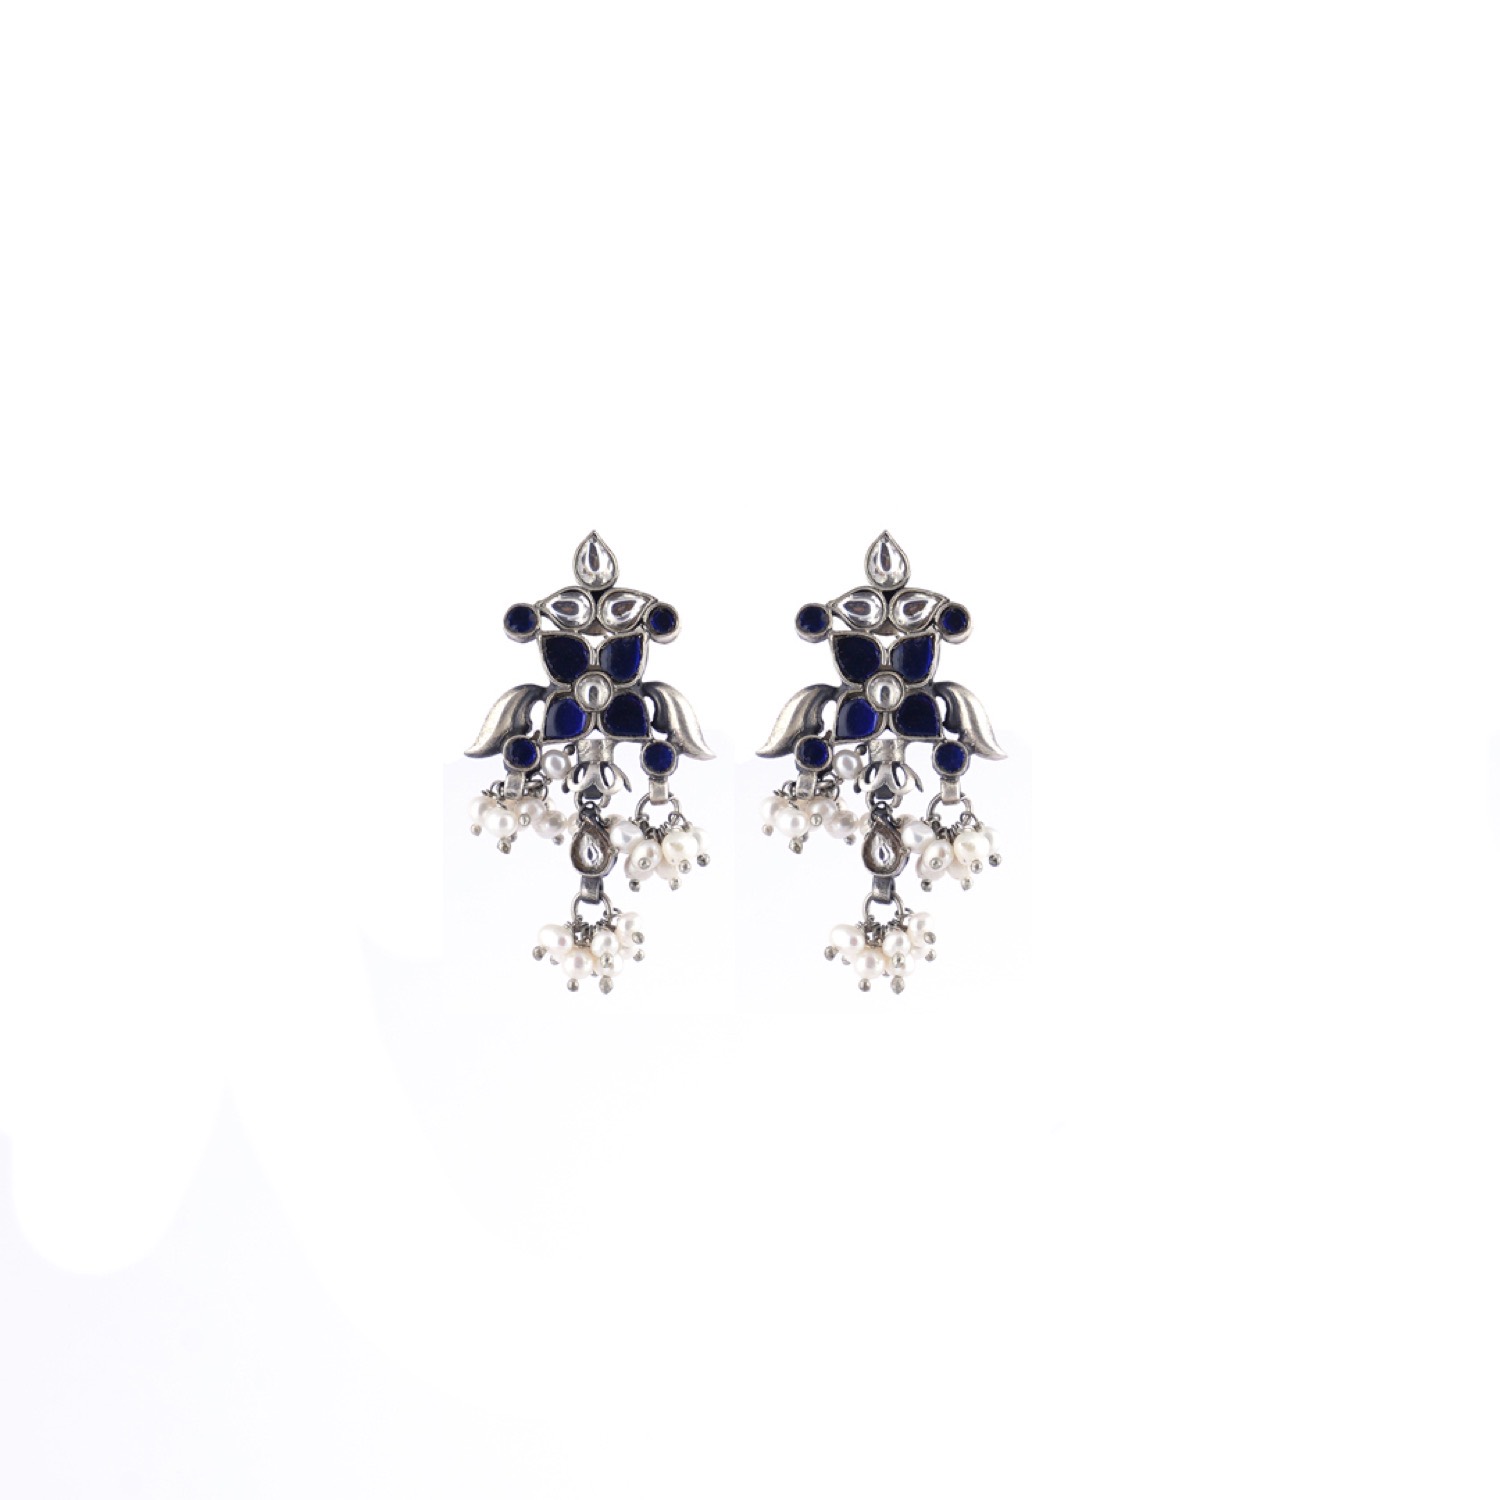 varam_earrings_102022_pear_shaped_royal_blue_and_white_stone_with_pearl_droping_silver_earrings-1